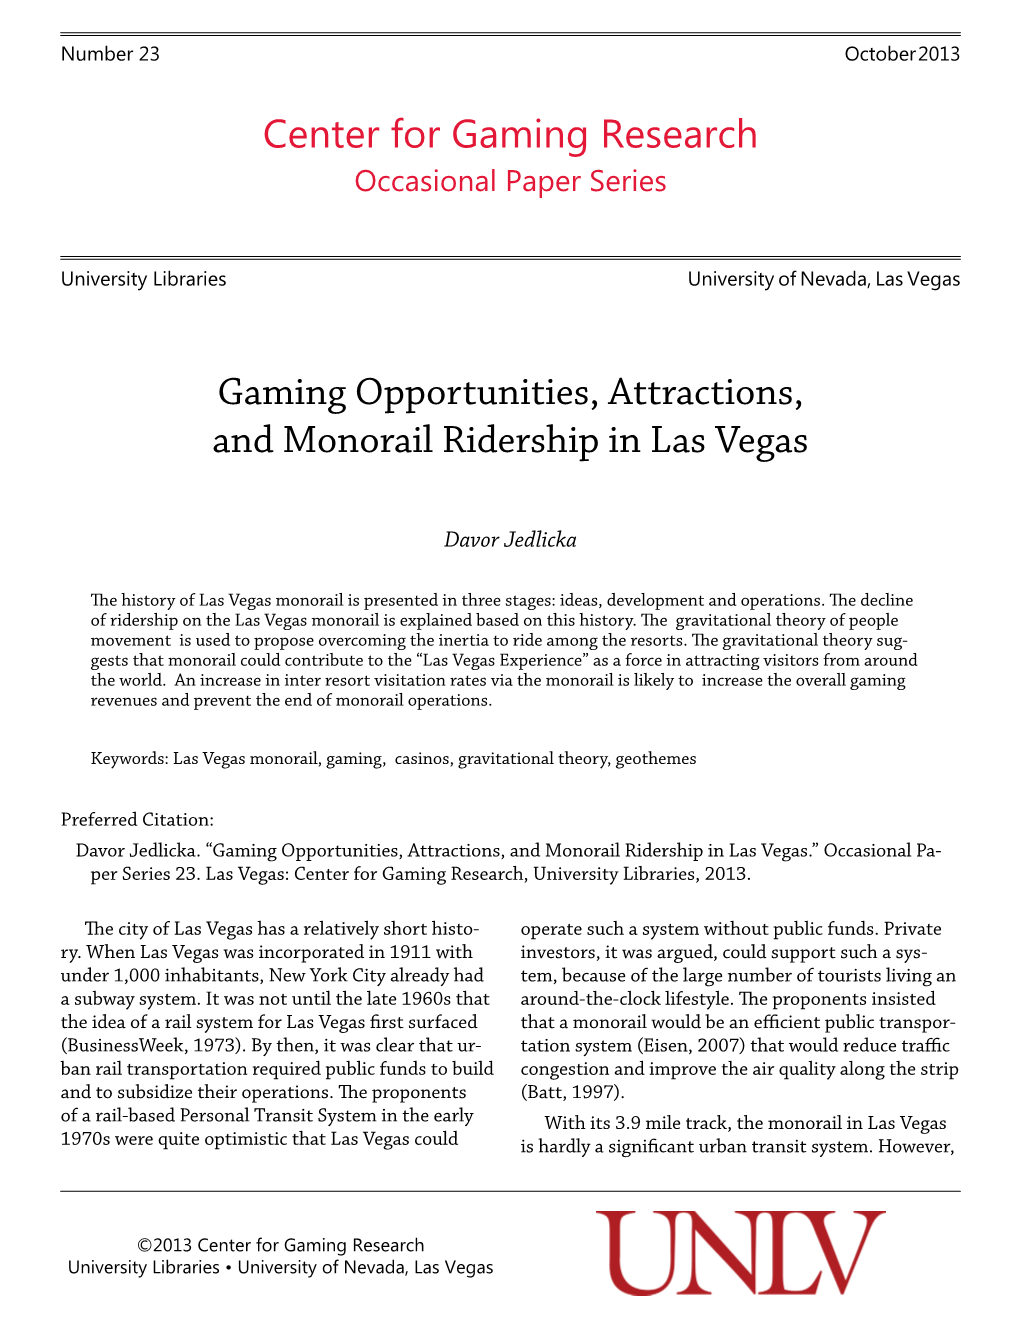 Gaming Opportunities, Attractions, and Monorail Ridership in Las Vegas